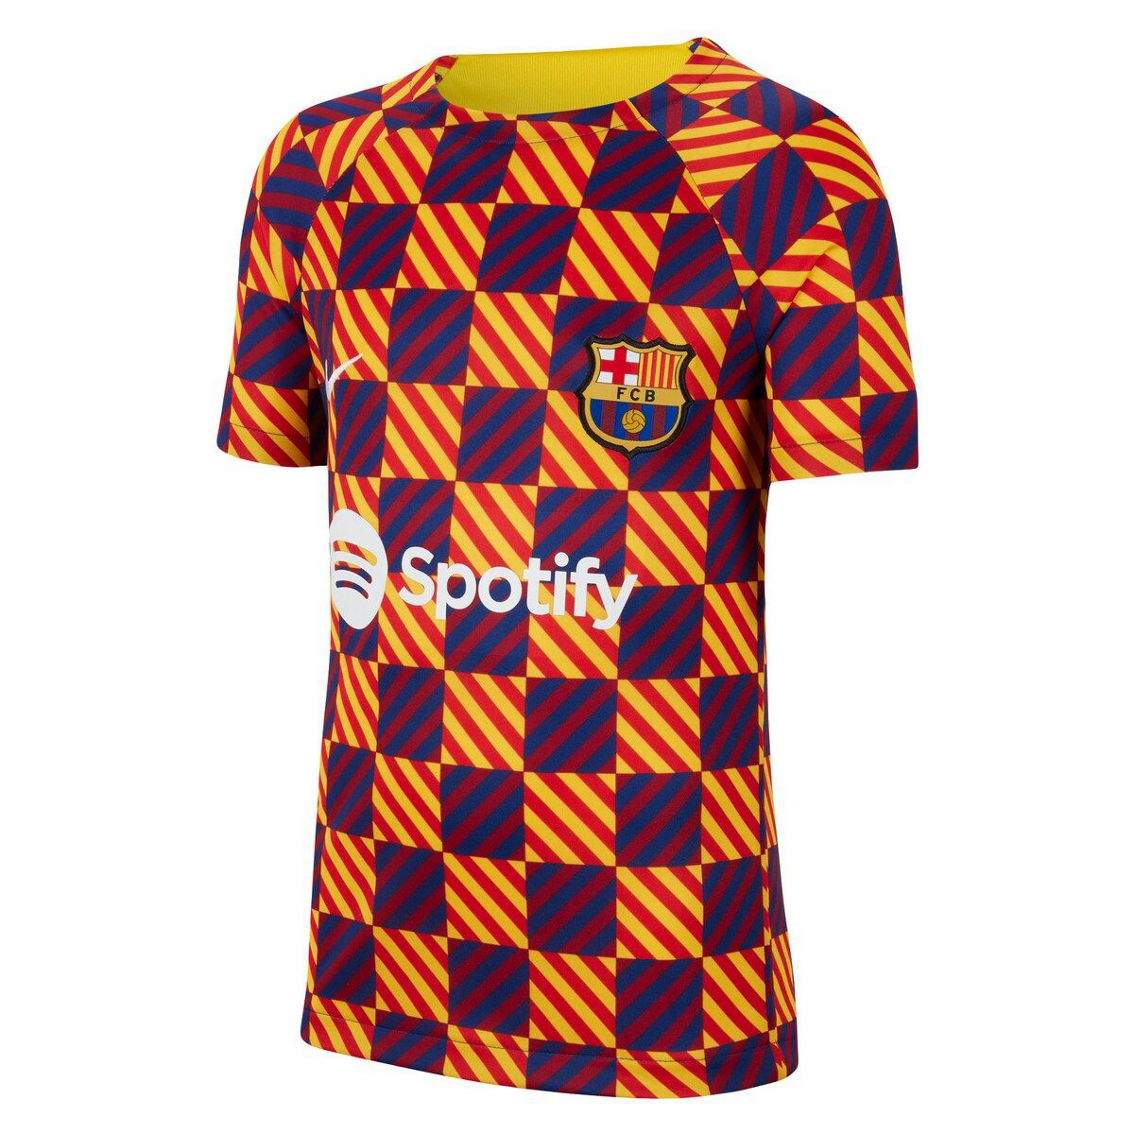 Nike Youth Yellow Barcelona Pre-Match Top - Image 3 of 4